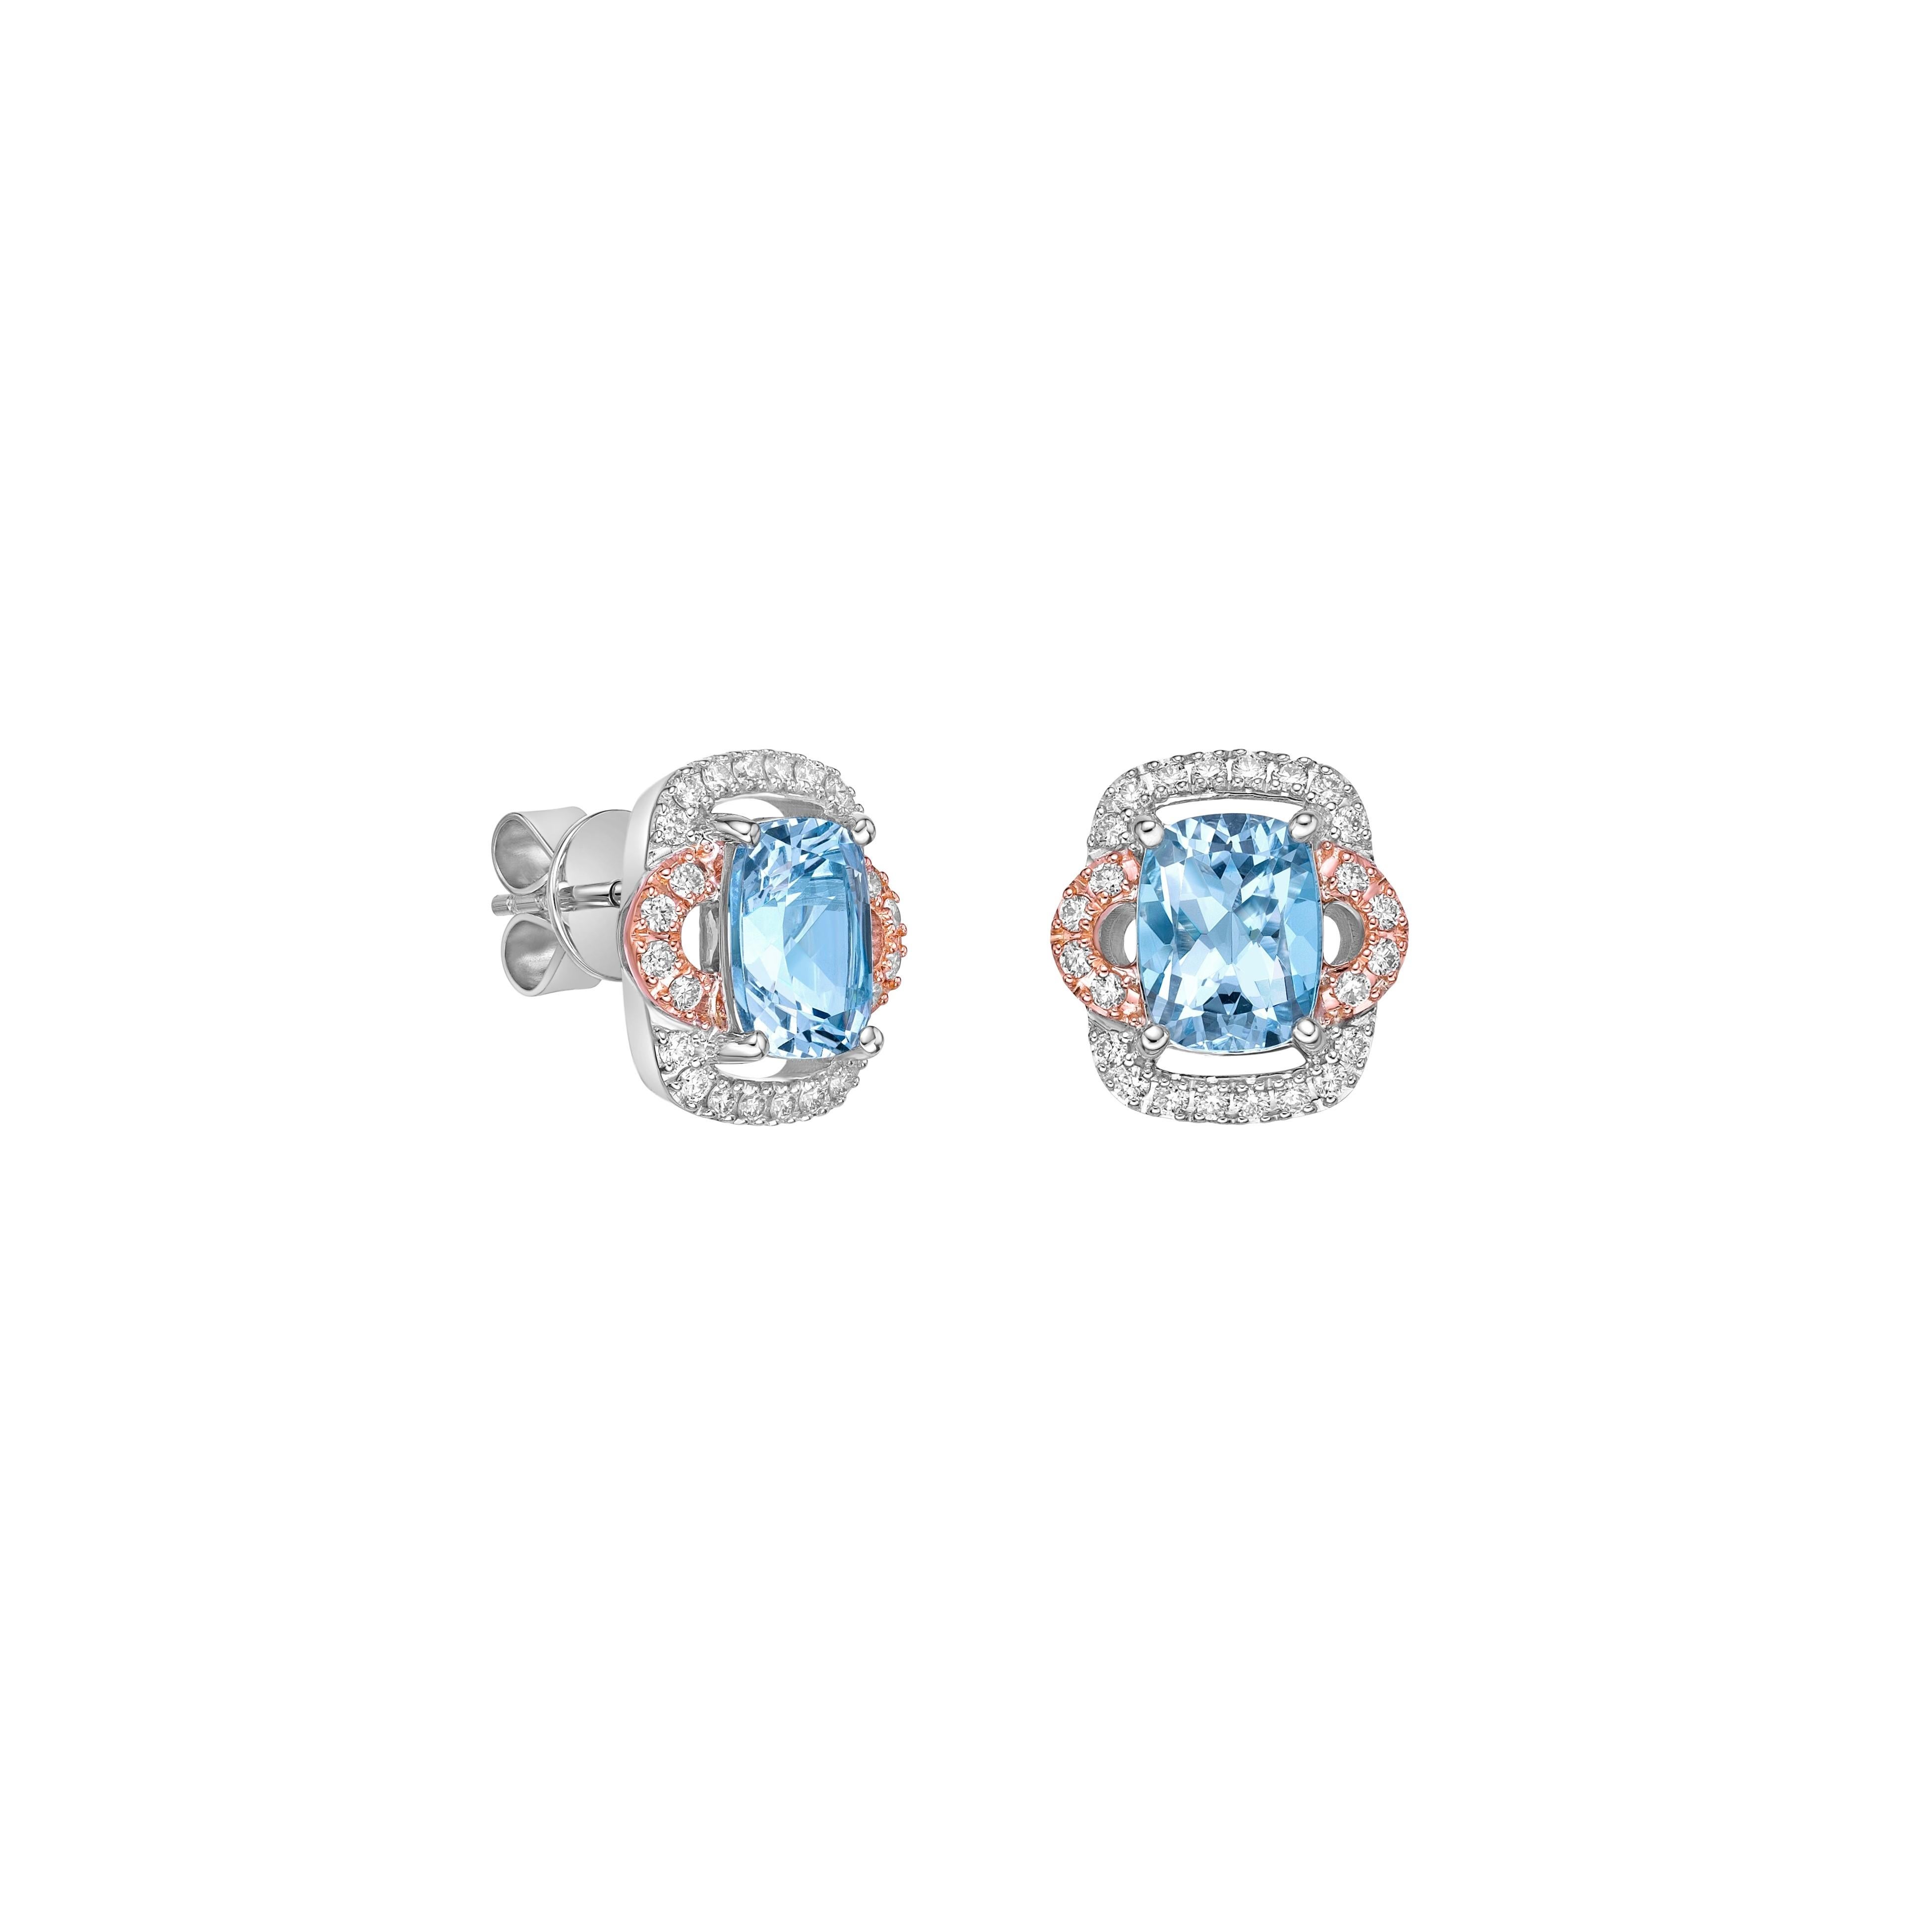 This collection features an array of Aquamarines with an icy blue hue that is as cool as it gets! Accented with Diamonds these Stud Earrings are made in White Rose Gold and present a classic yet elegant look.

Aquamarine Stud Earring in 18Karat